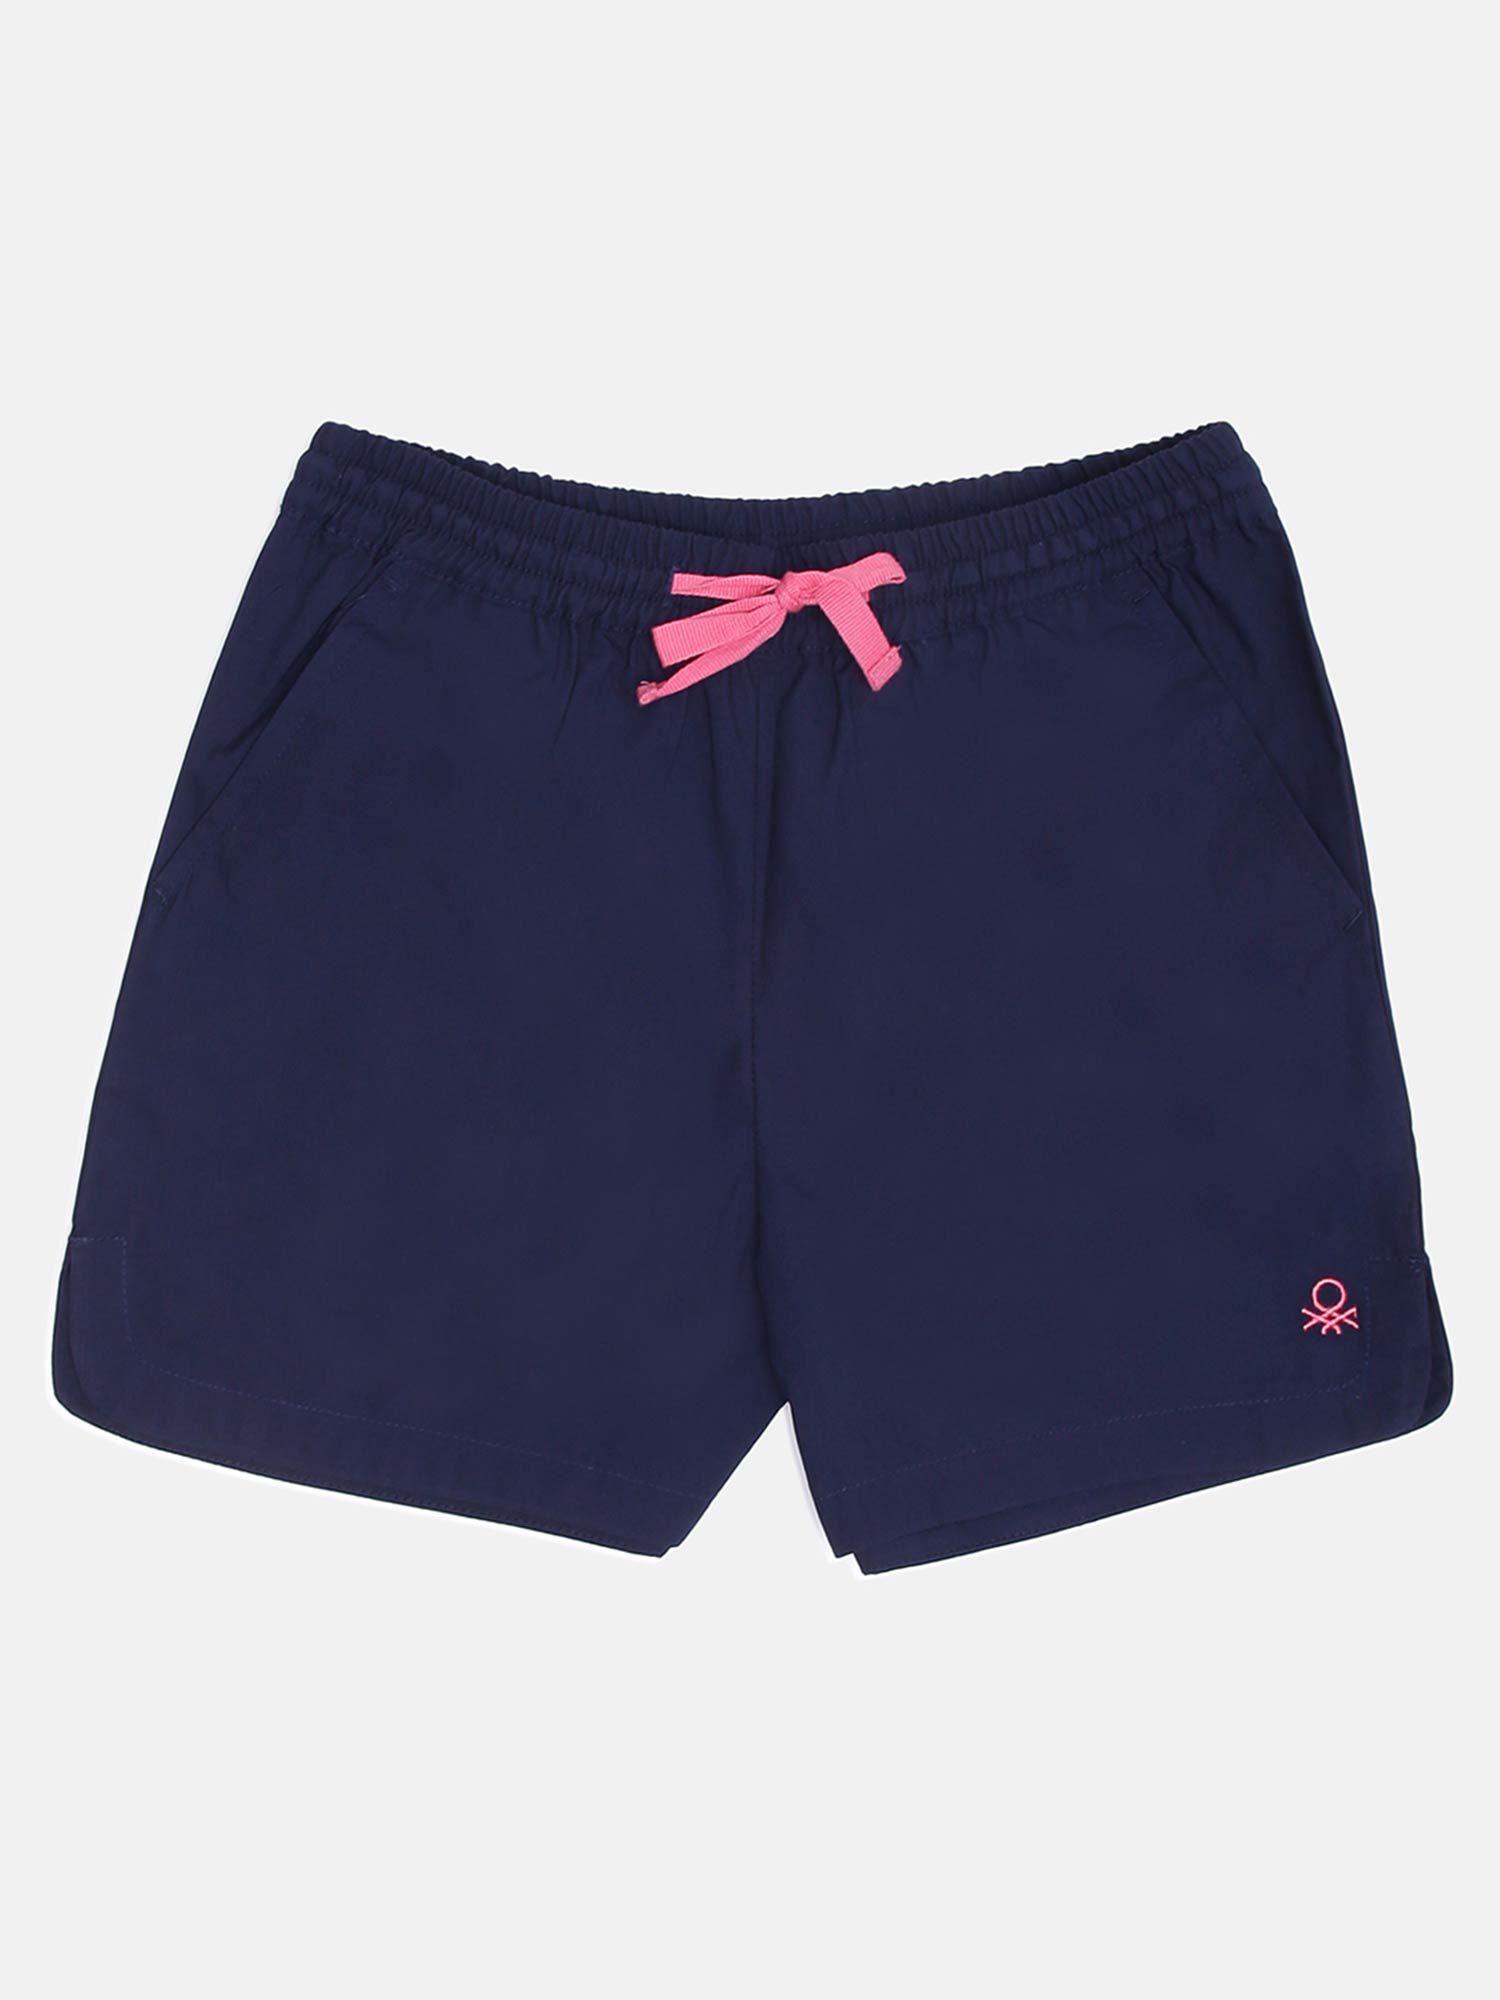 solid shorts- navy blue